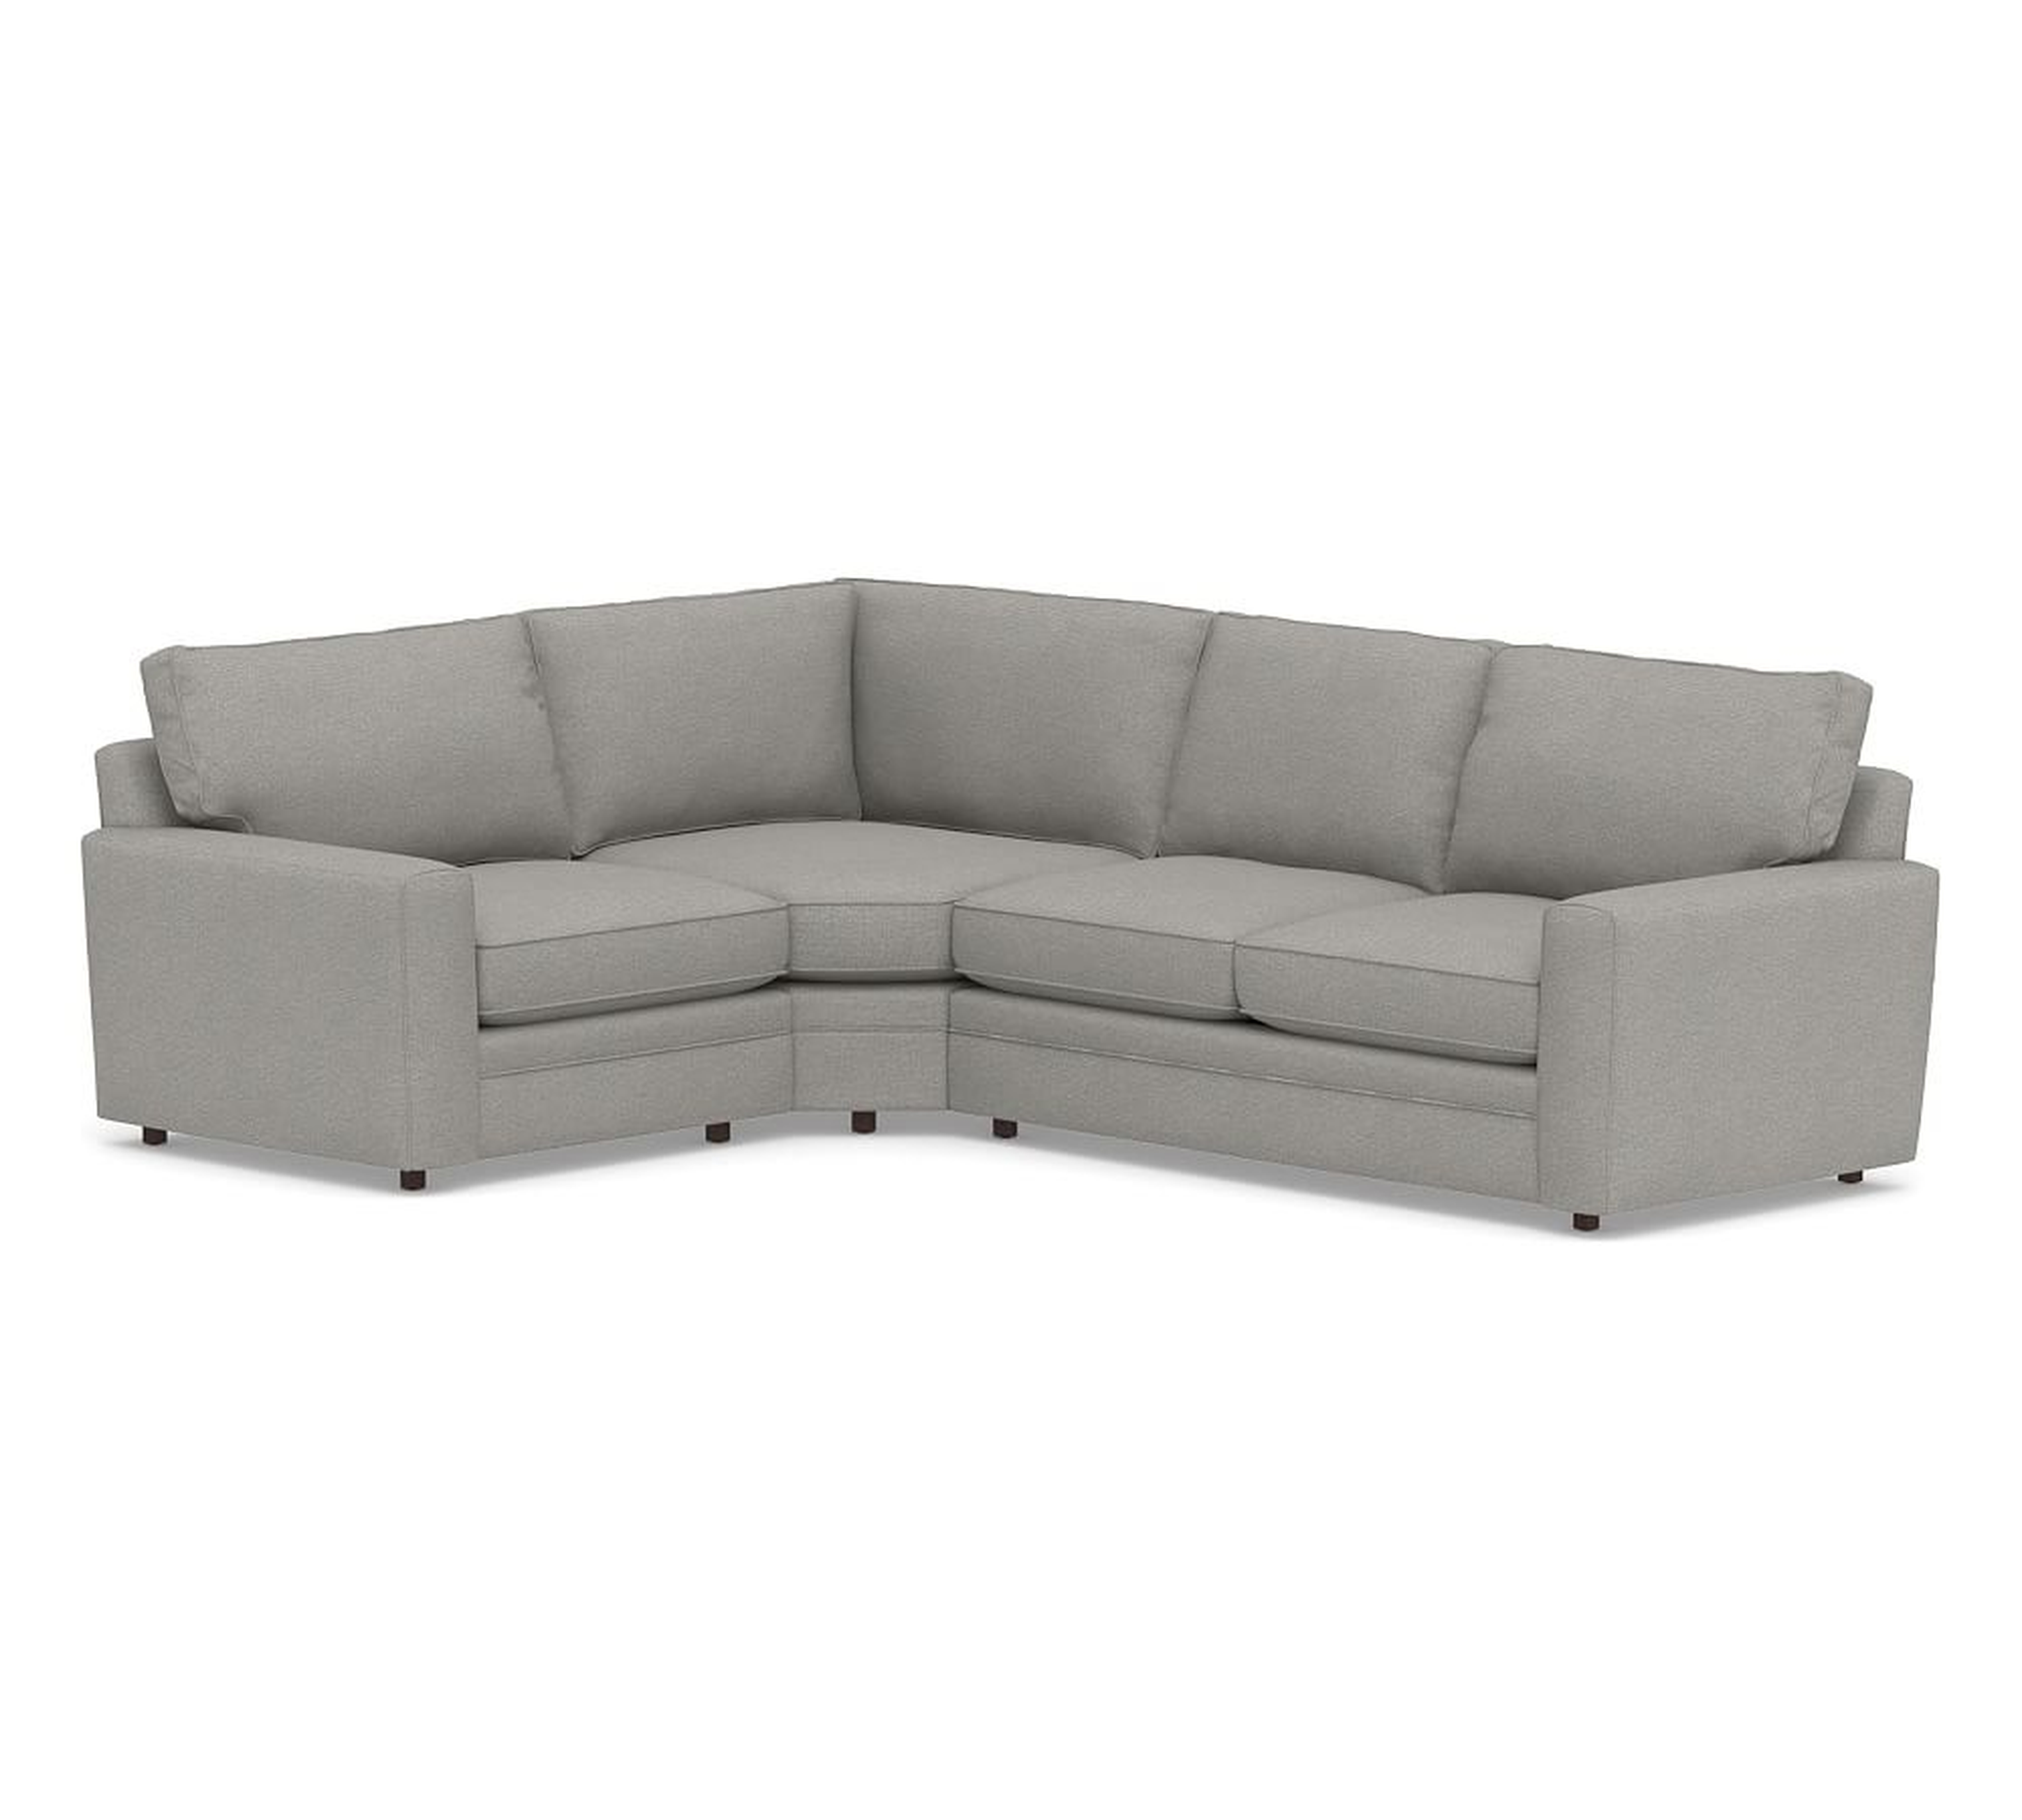 Pearce Square Arm Upholstered Right Arm 3-Piece Wedge Sectional, Down Blend Wrapped Cushions, Performance Heathered Basketweave Platinum - Pottery Barn